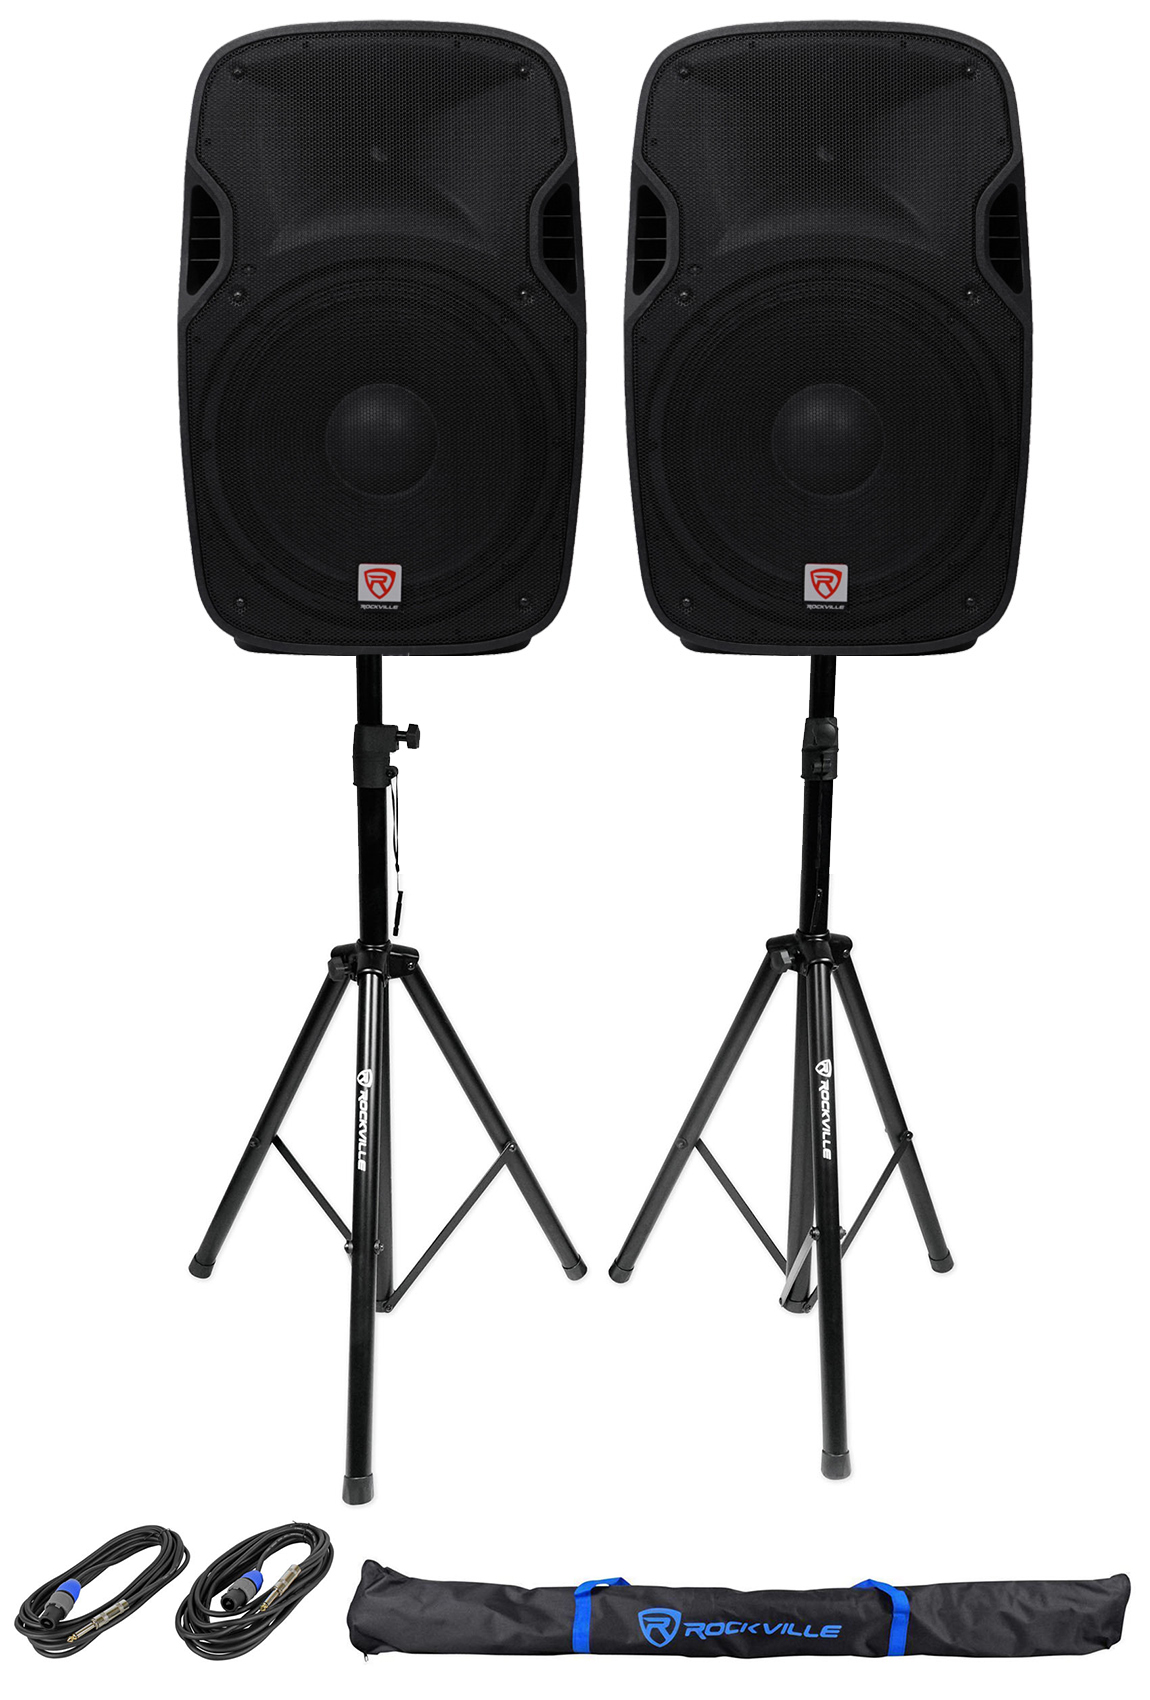 2 Rockville SPGN158 15" Passive 1600W ABS Plastic PA Speakers+Stands+Cables+Bags - image 1 of 25